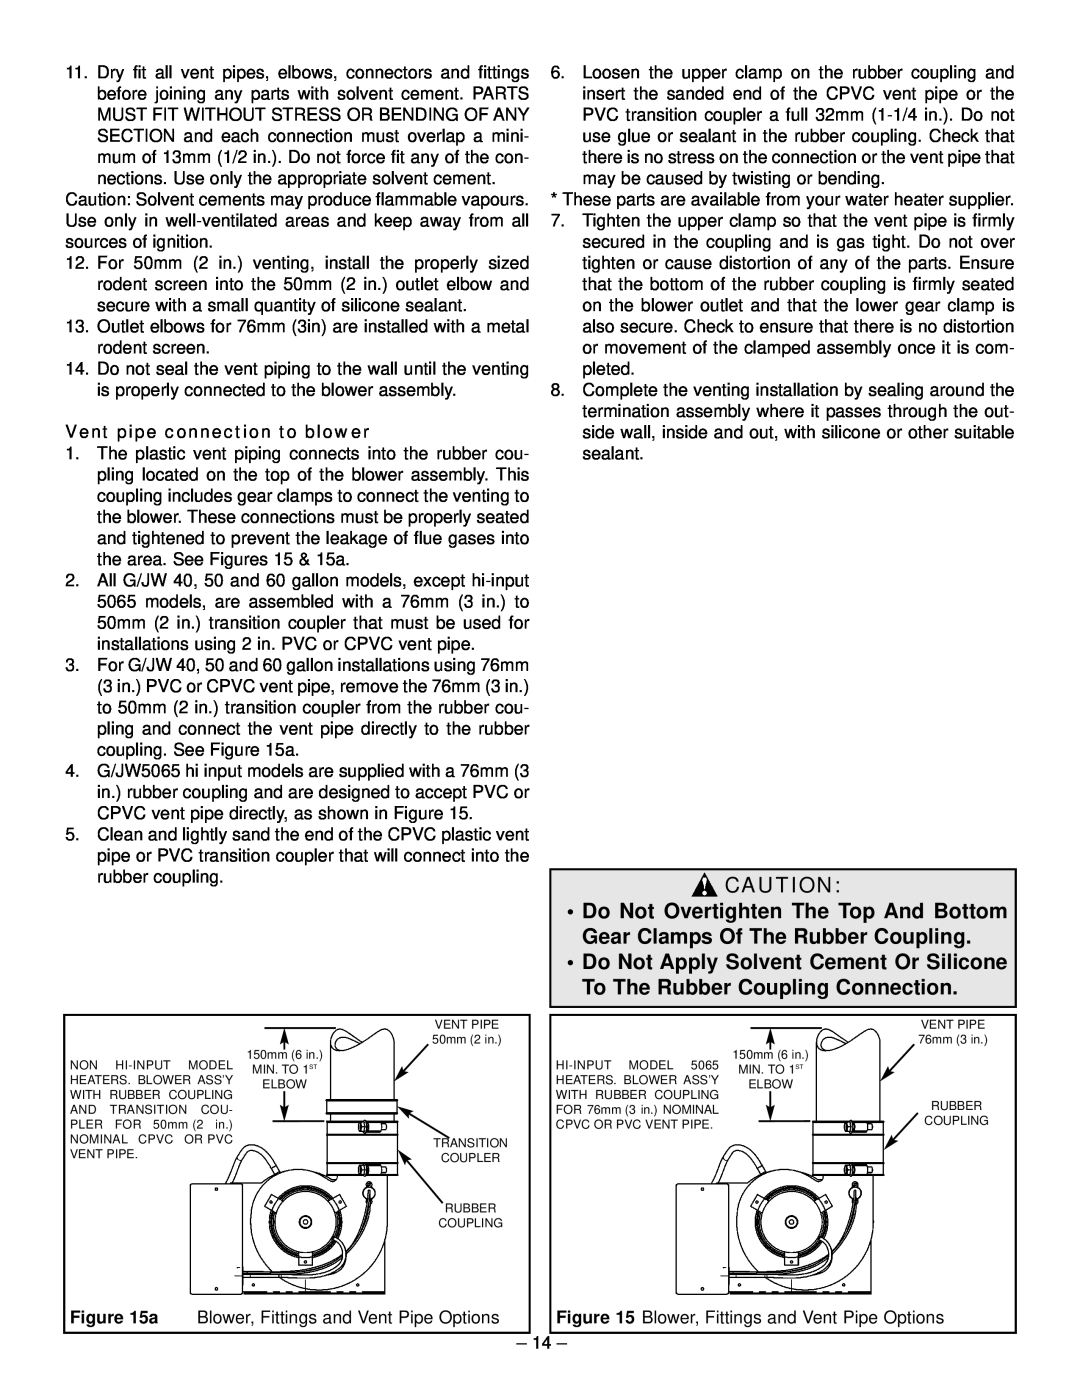 GSW 319594-000 manual Vent pipe connection to blower 